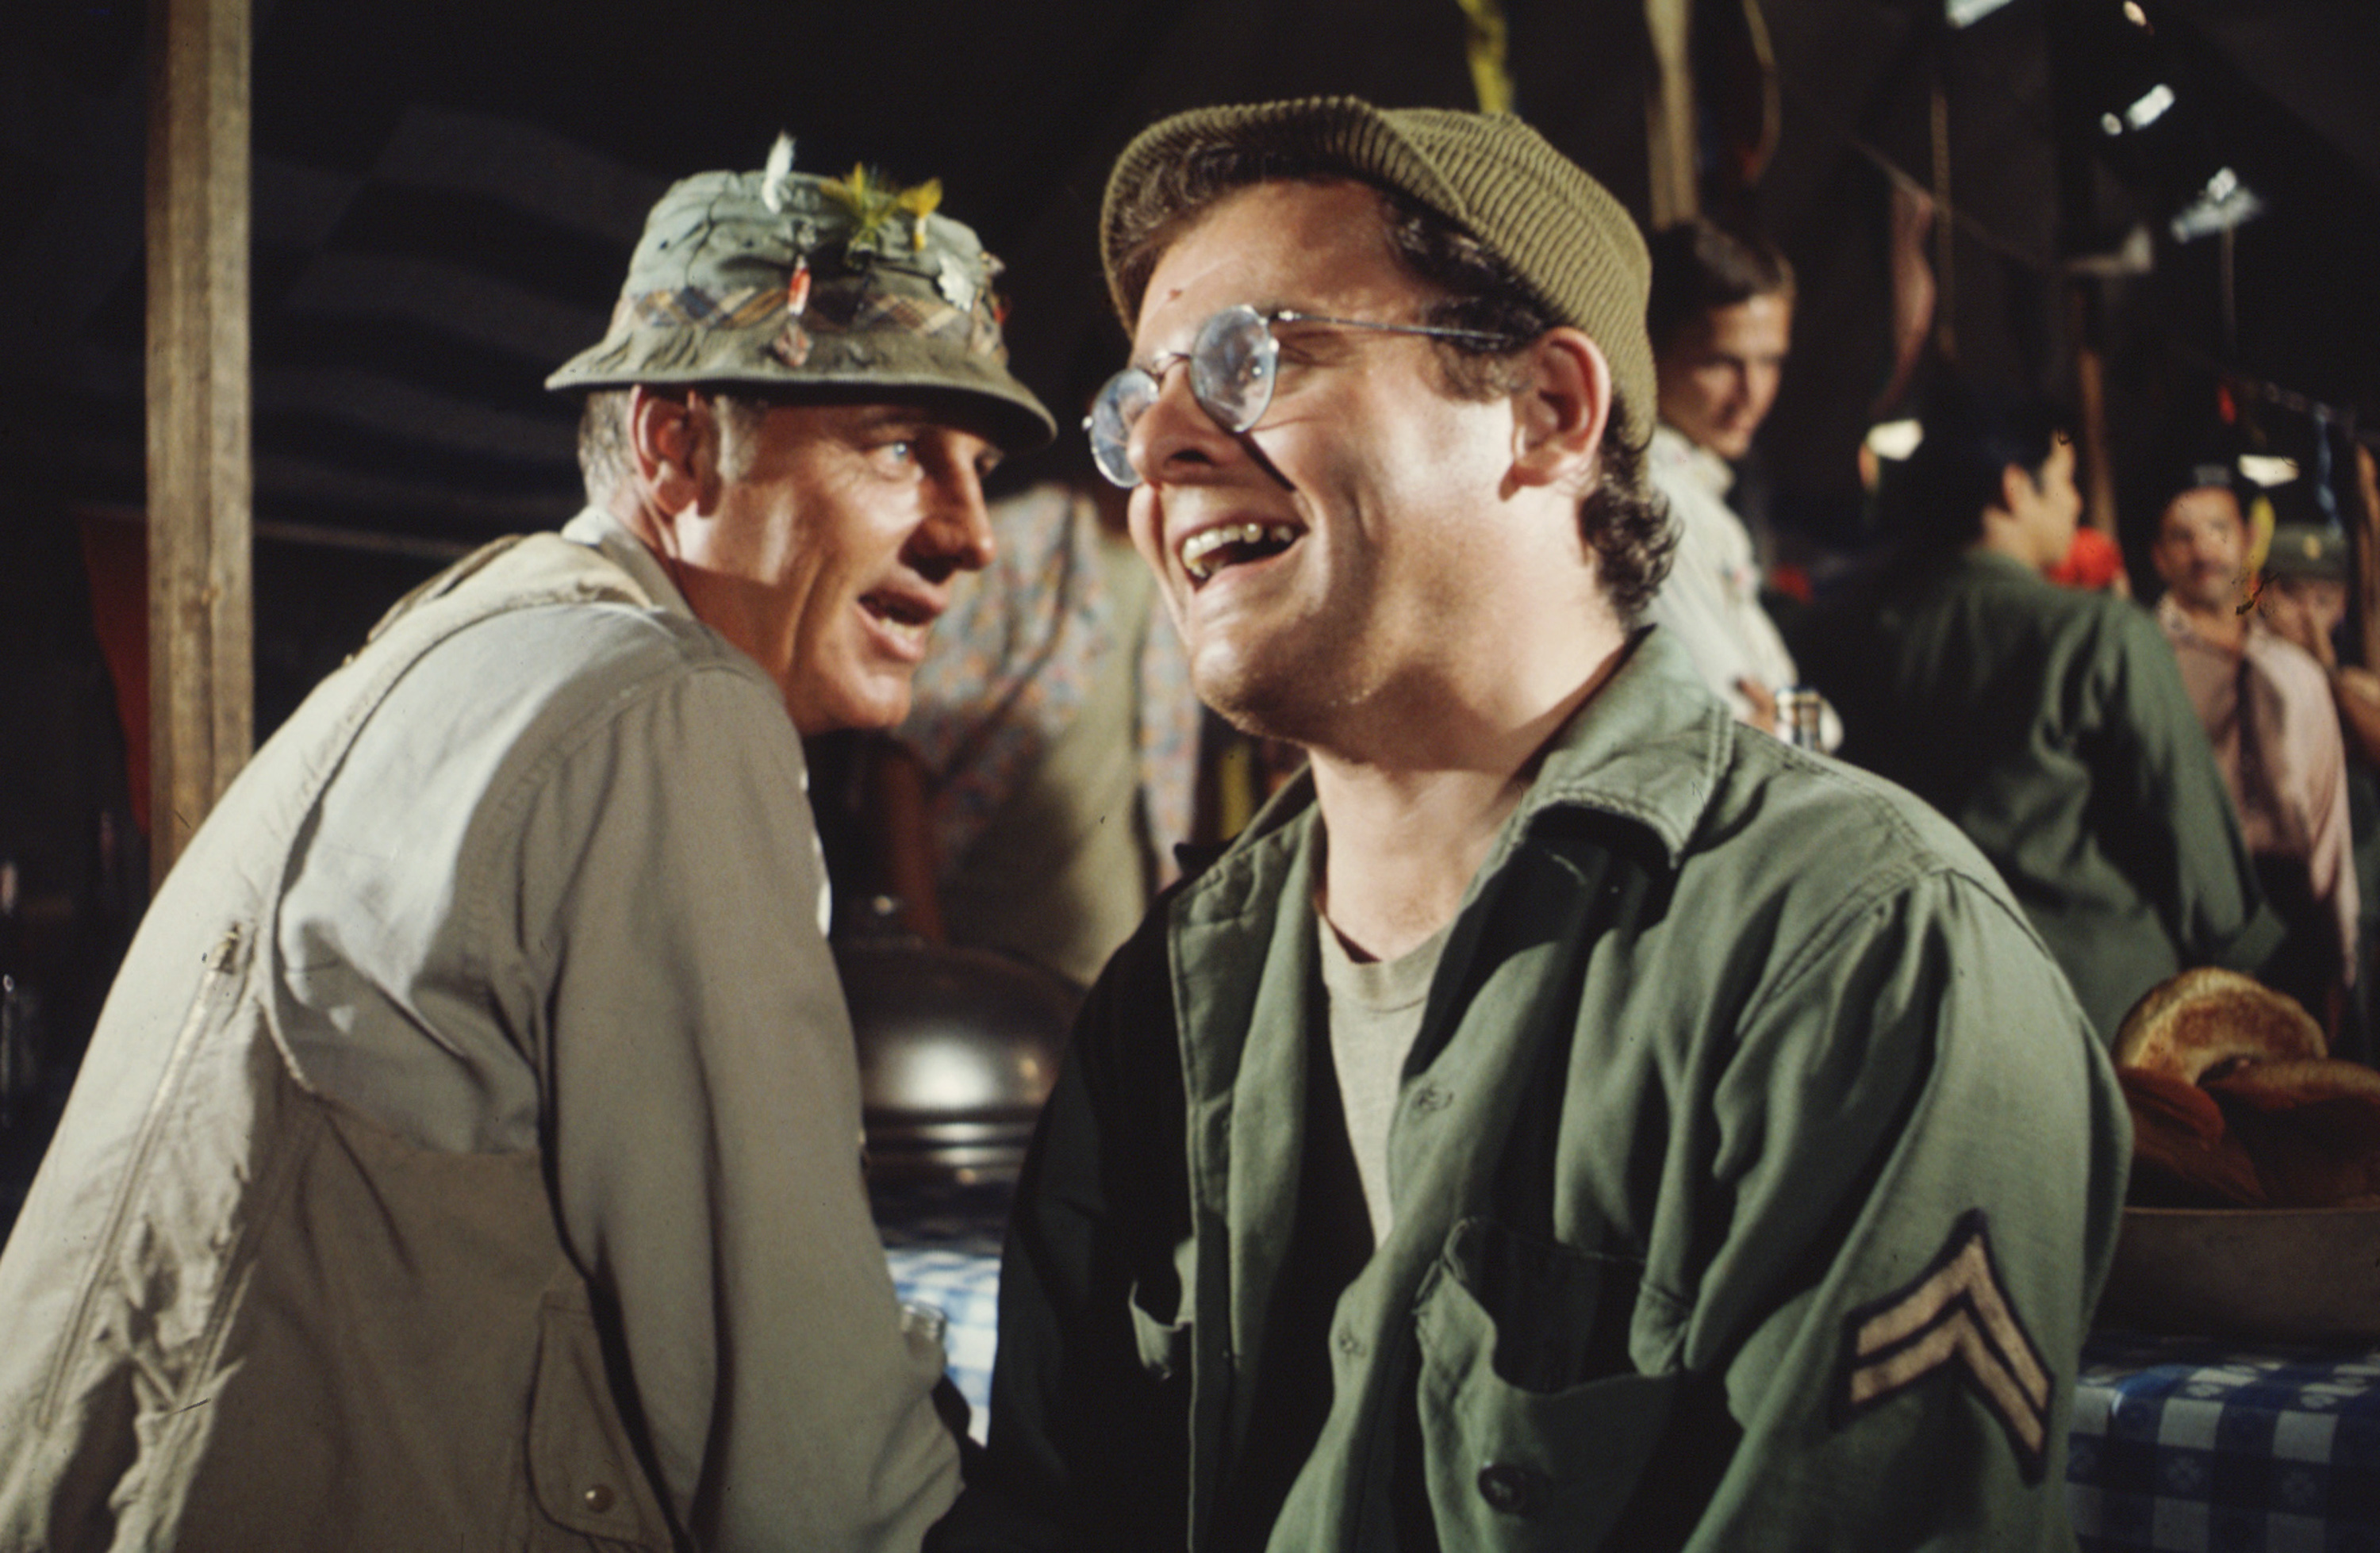 McLean Stevenson as Lt. Col. Henry Blake and Gary Burghoff as Corporal Walter Radar O'Reilly in a scene from the television series "M*A*S*H," in California, 1975 | Source: Getty Images